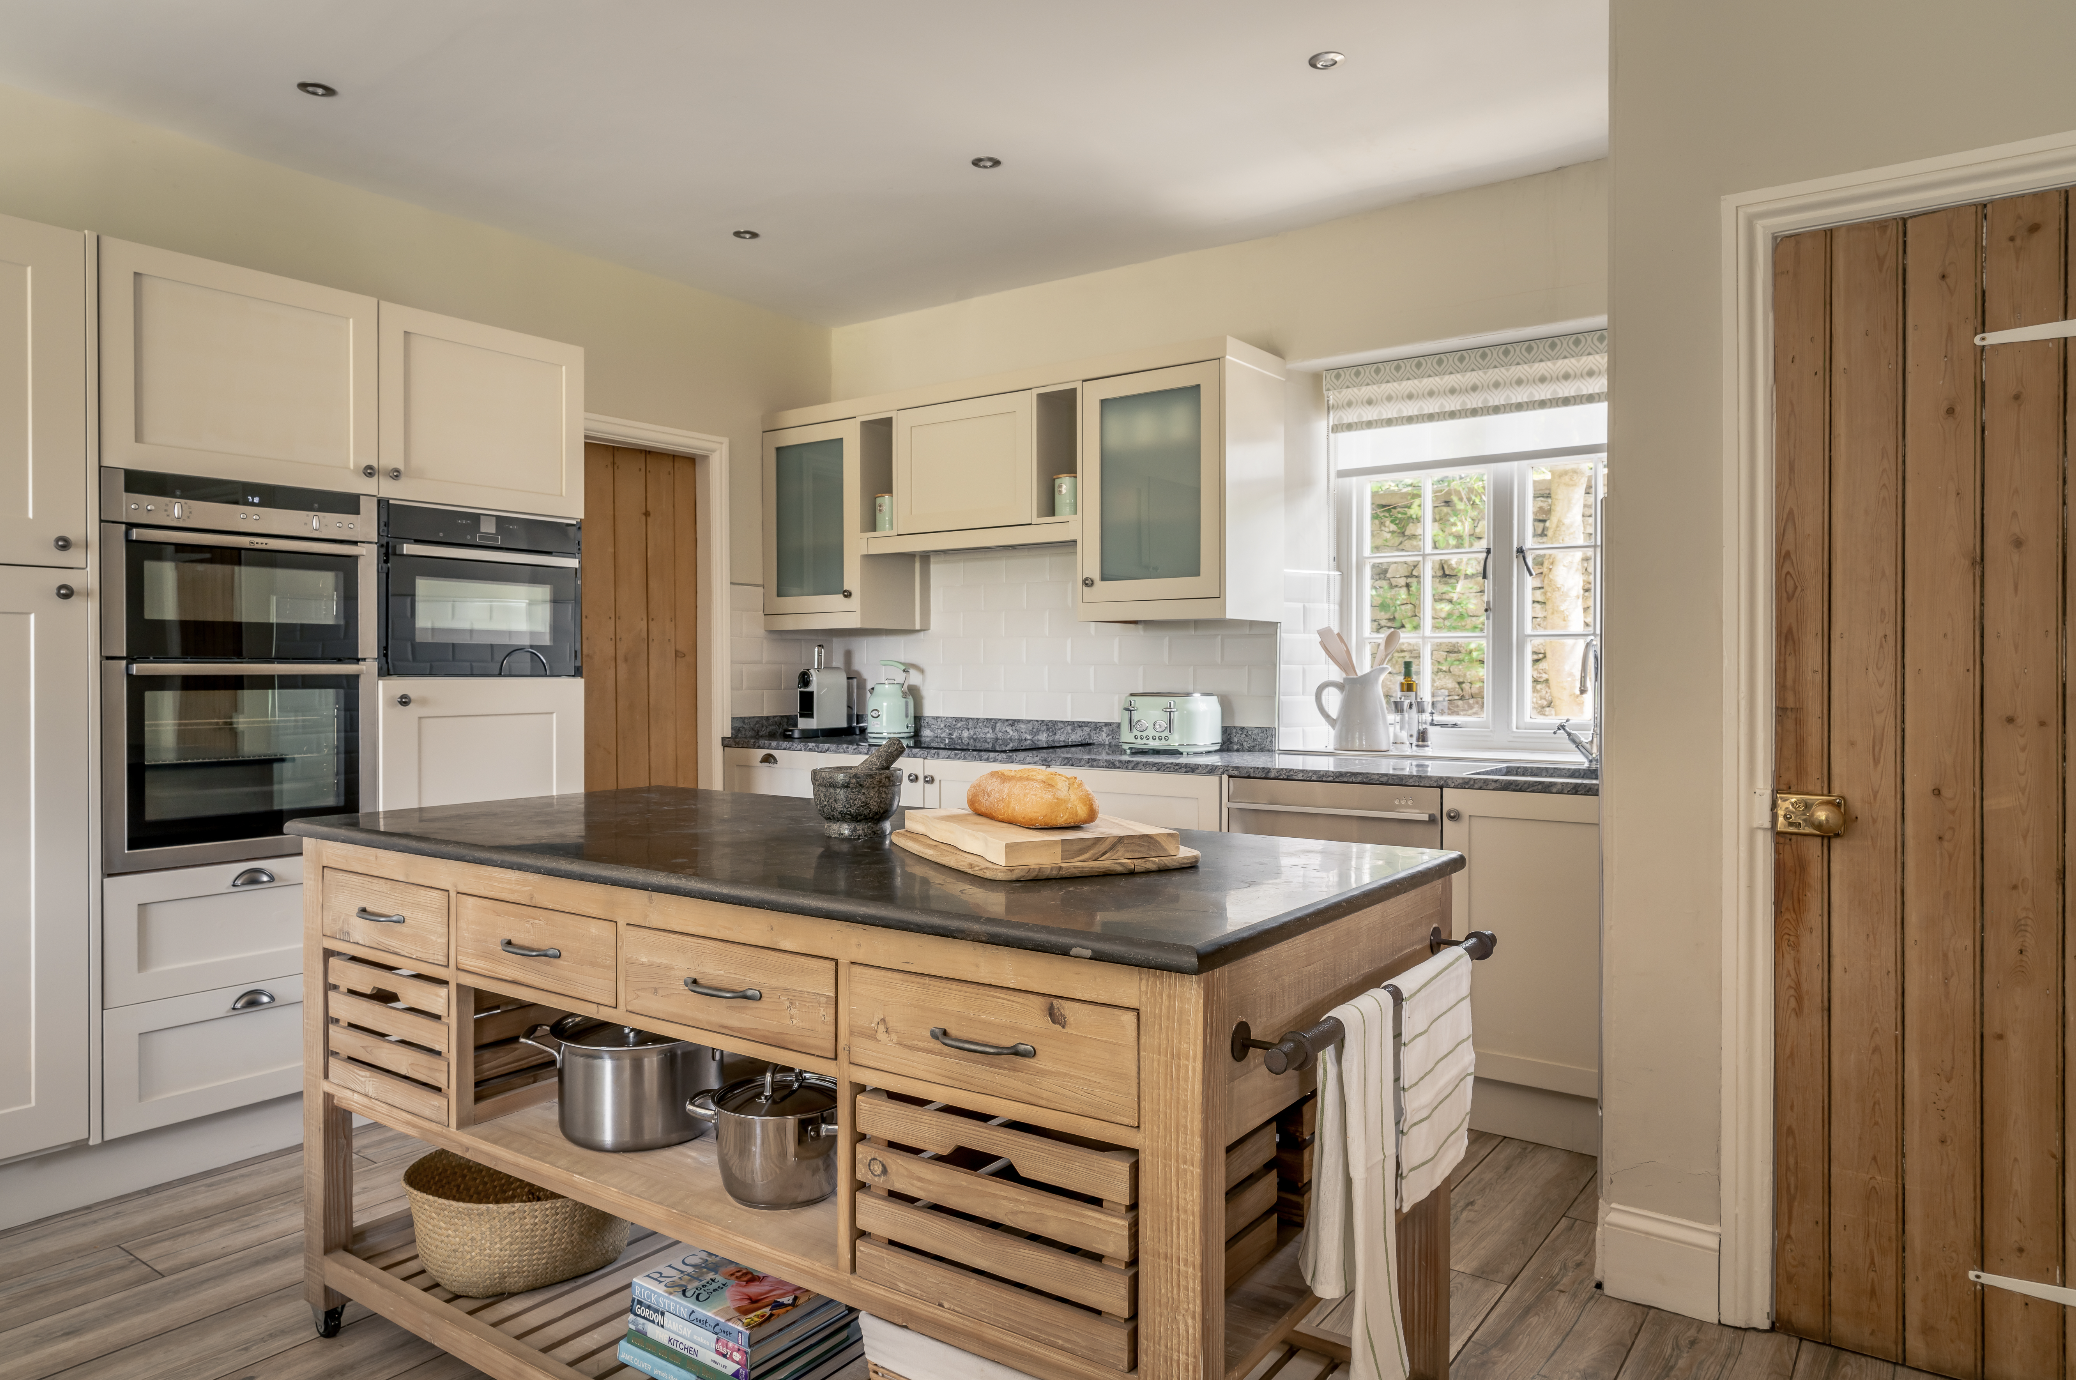 Luxury large holiday let with hot tub in Kirkby Lonsdale near the lake district and Yorkshire dales for special occasions and weddings - kitchen with island unit - downstairs bedroom